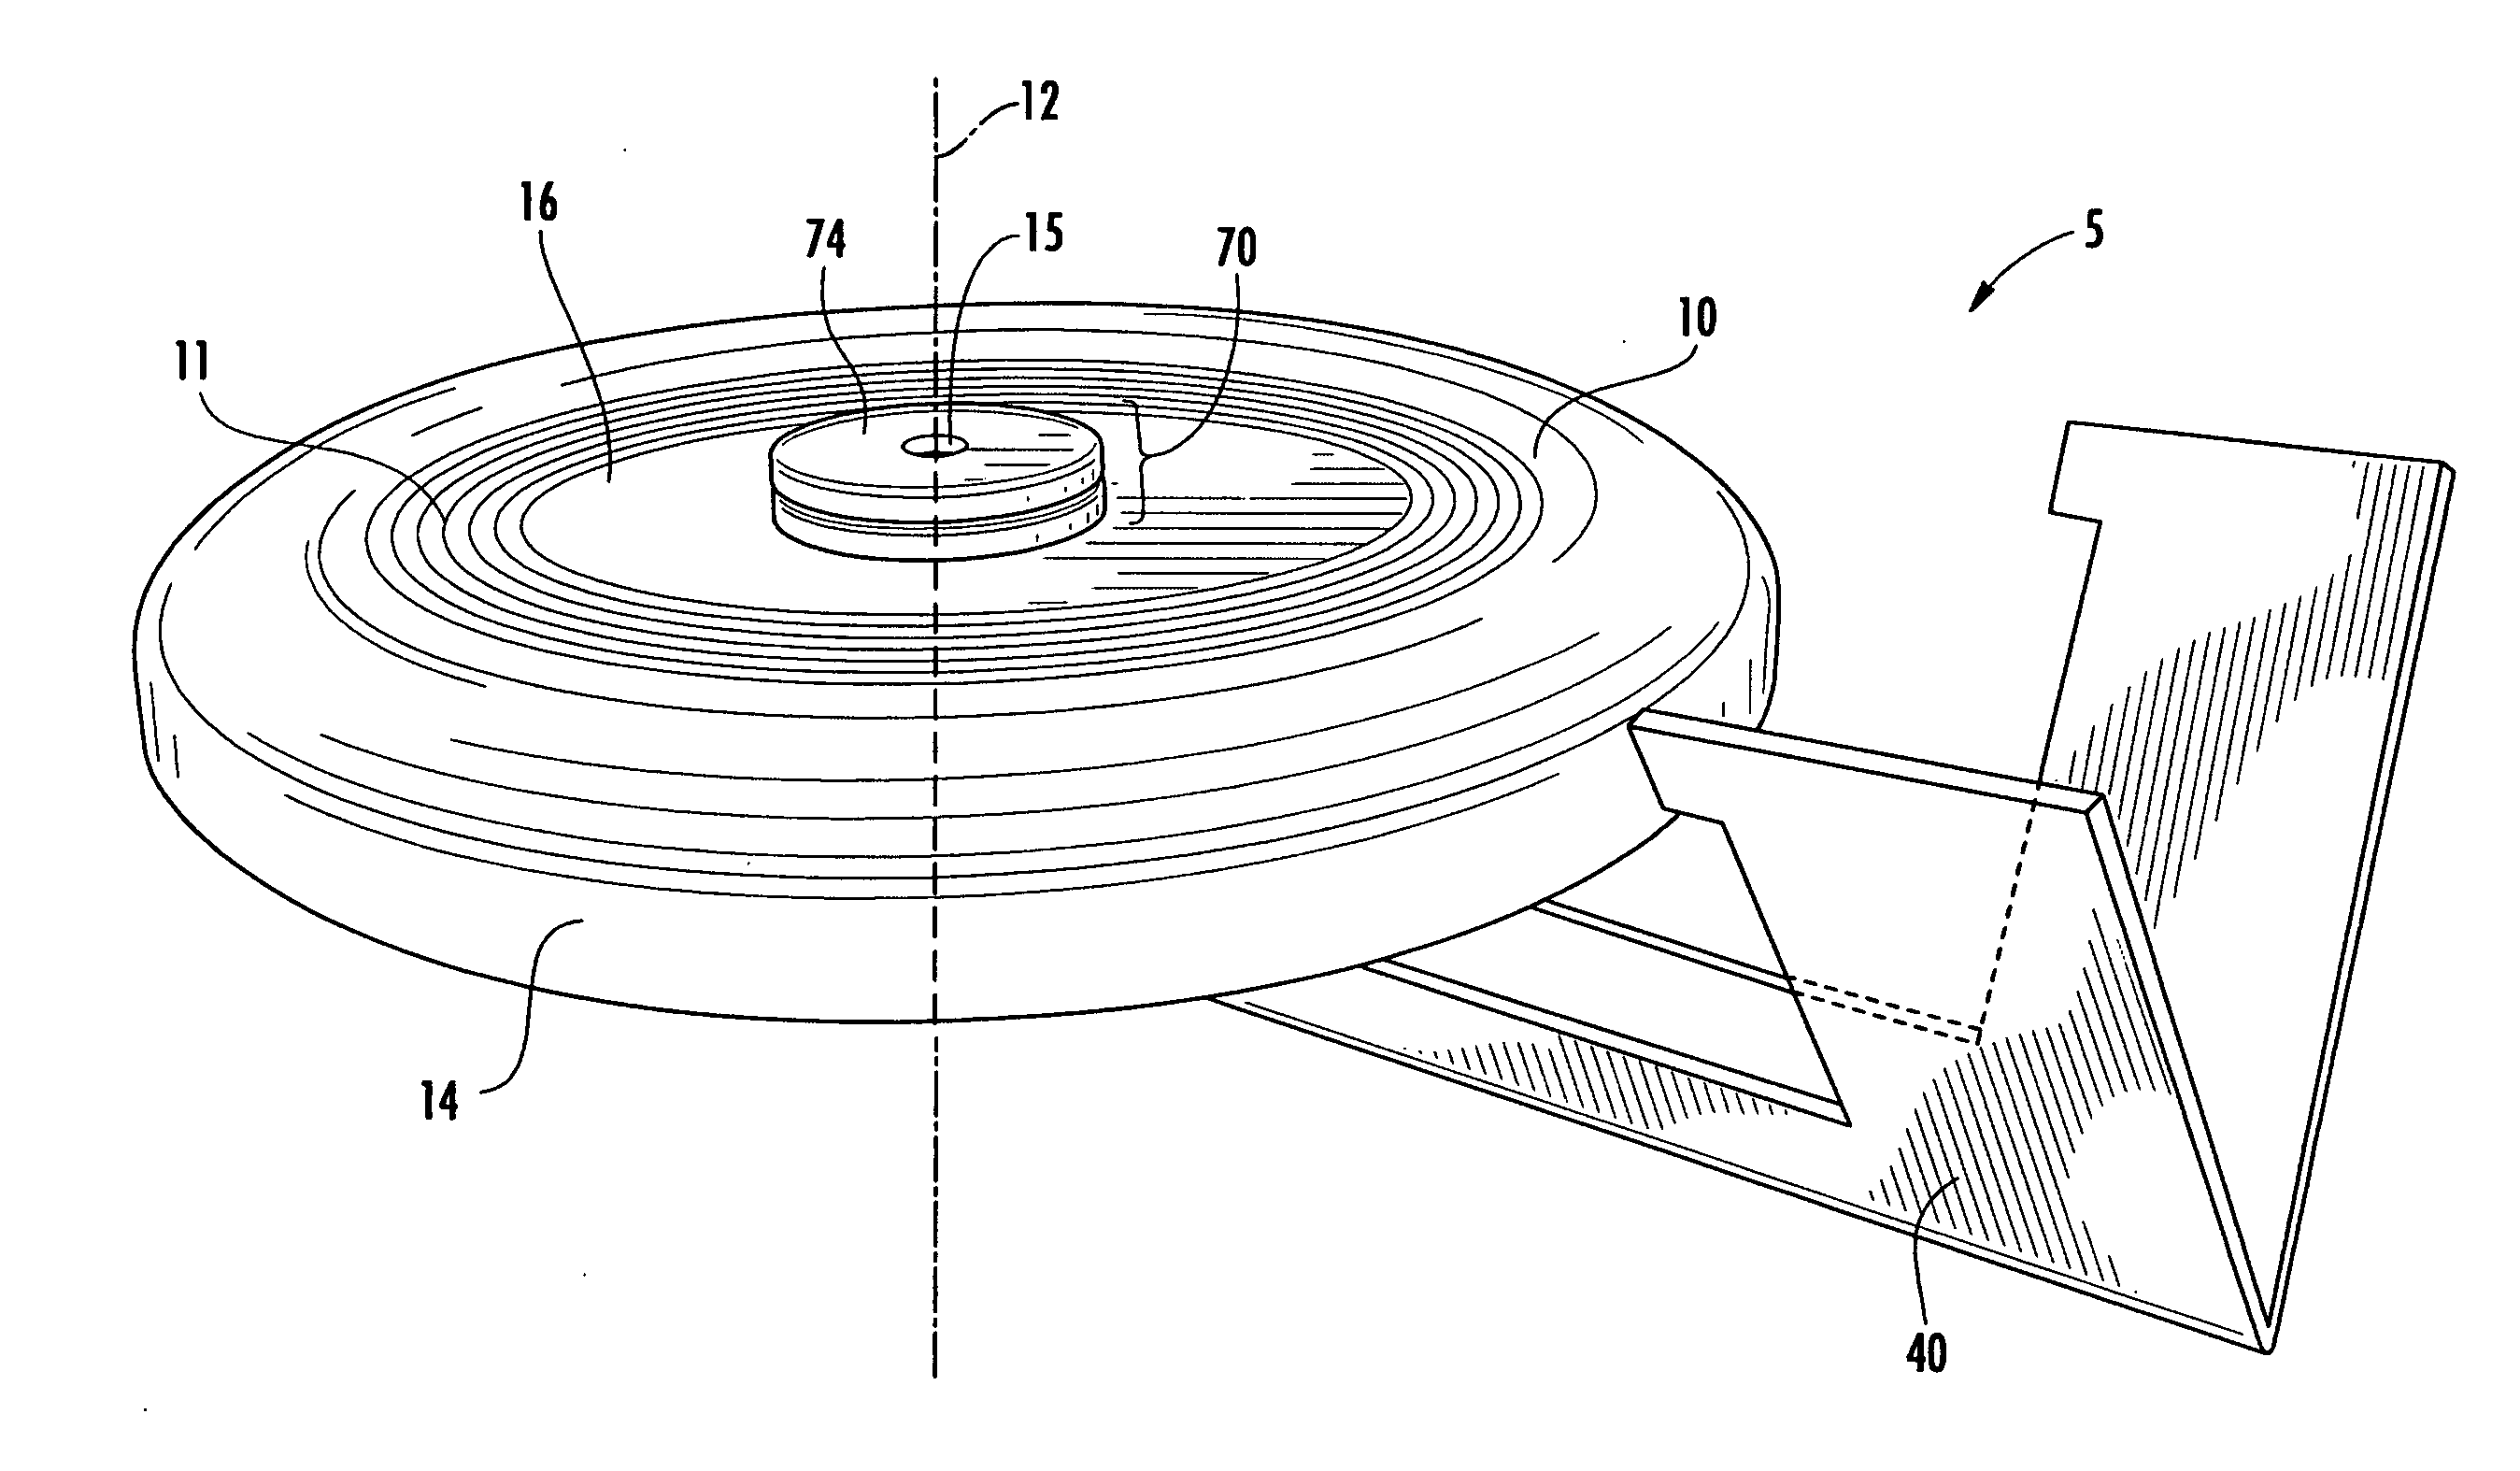 Flying toy having gyroscopic and gliding components